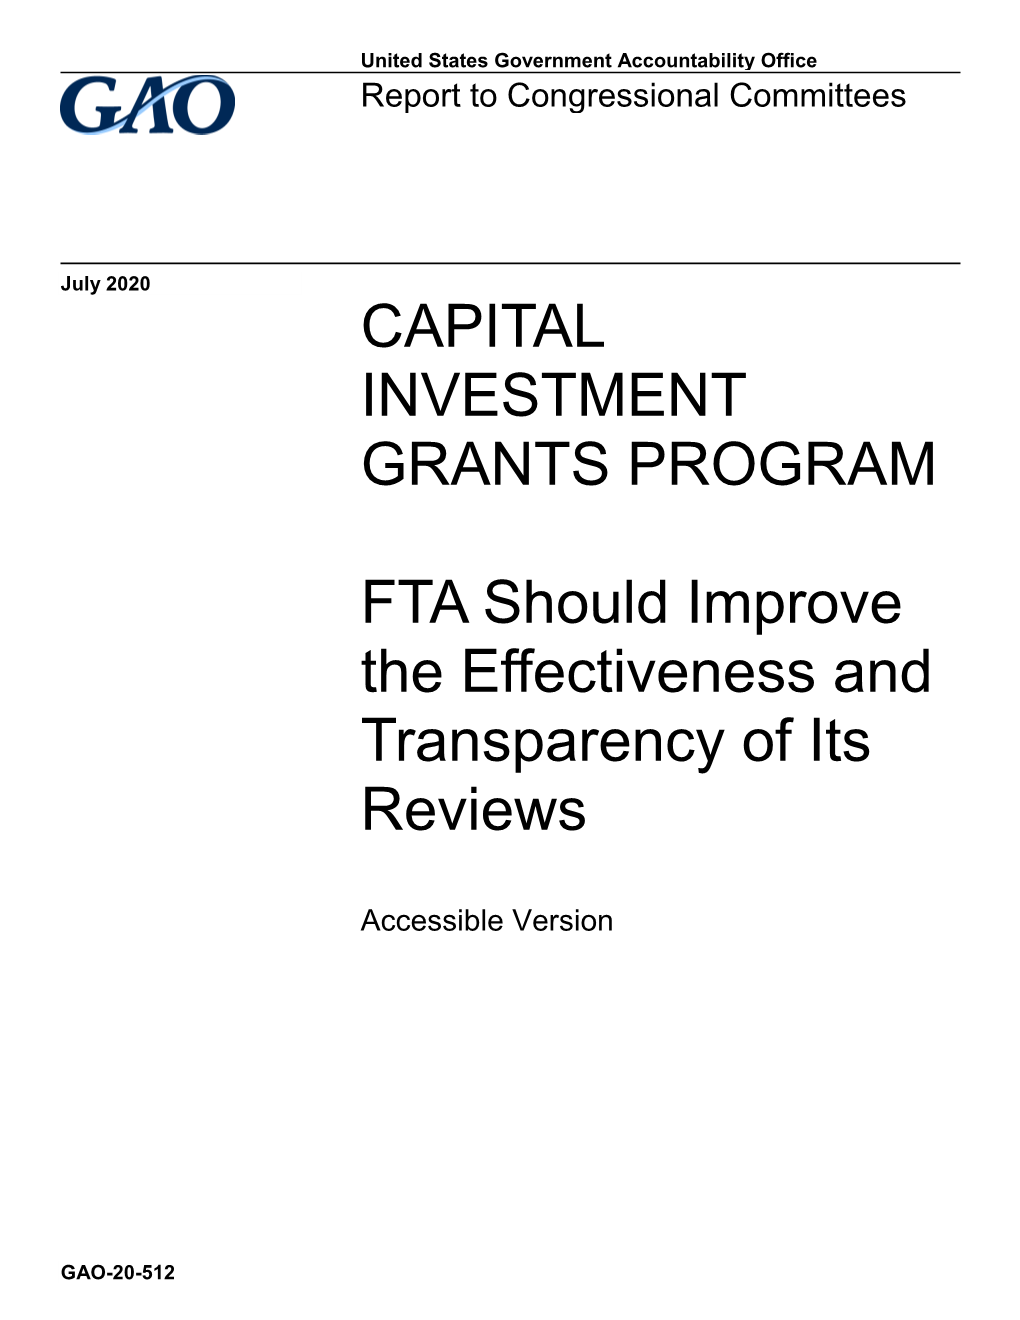 GAO-20-512, Accessible Version, Capital Investment Grants Program